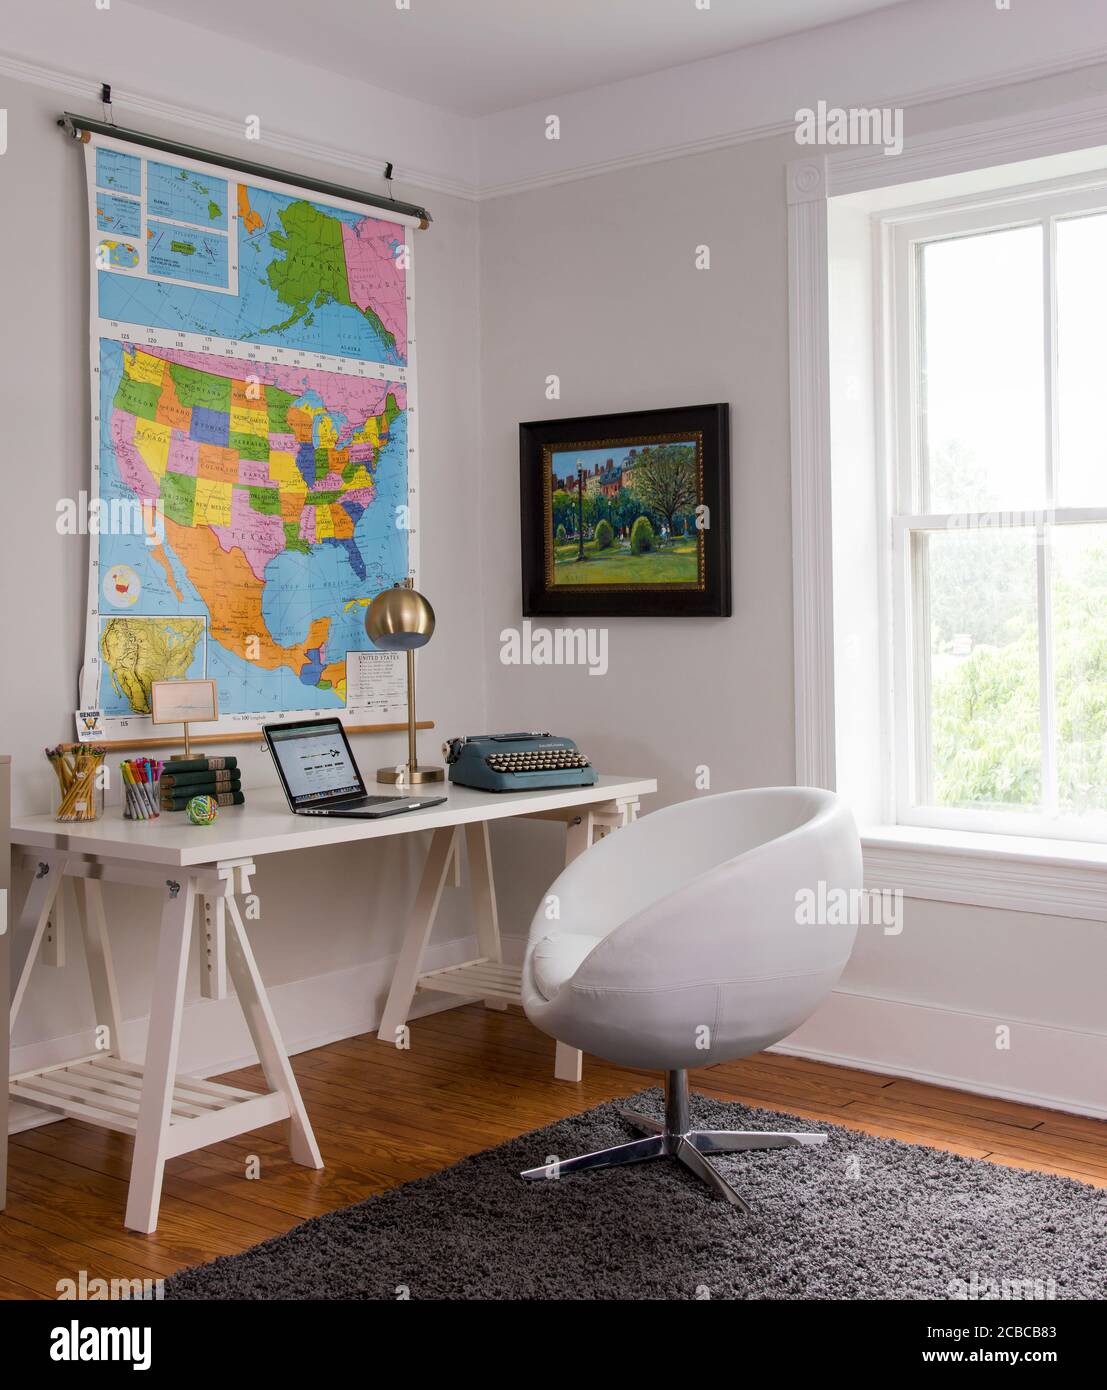 Desk in home, Map on Wall Stock Photo